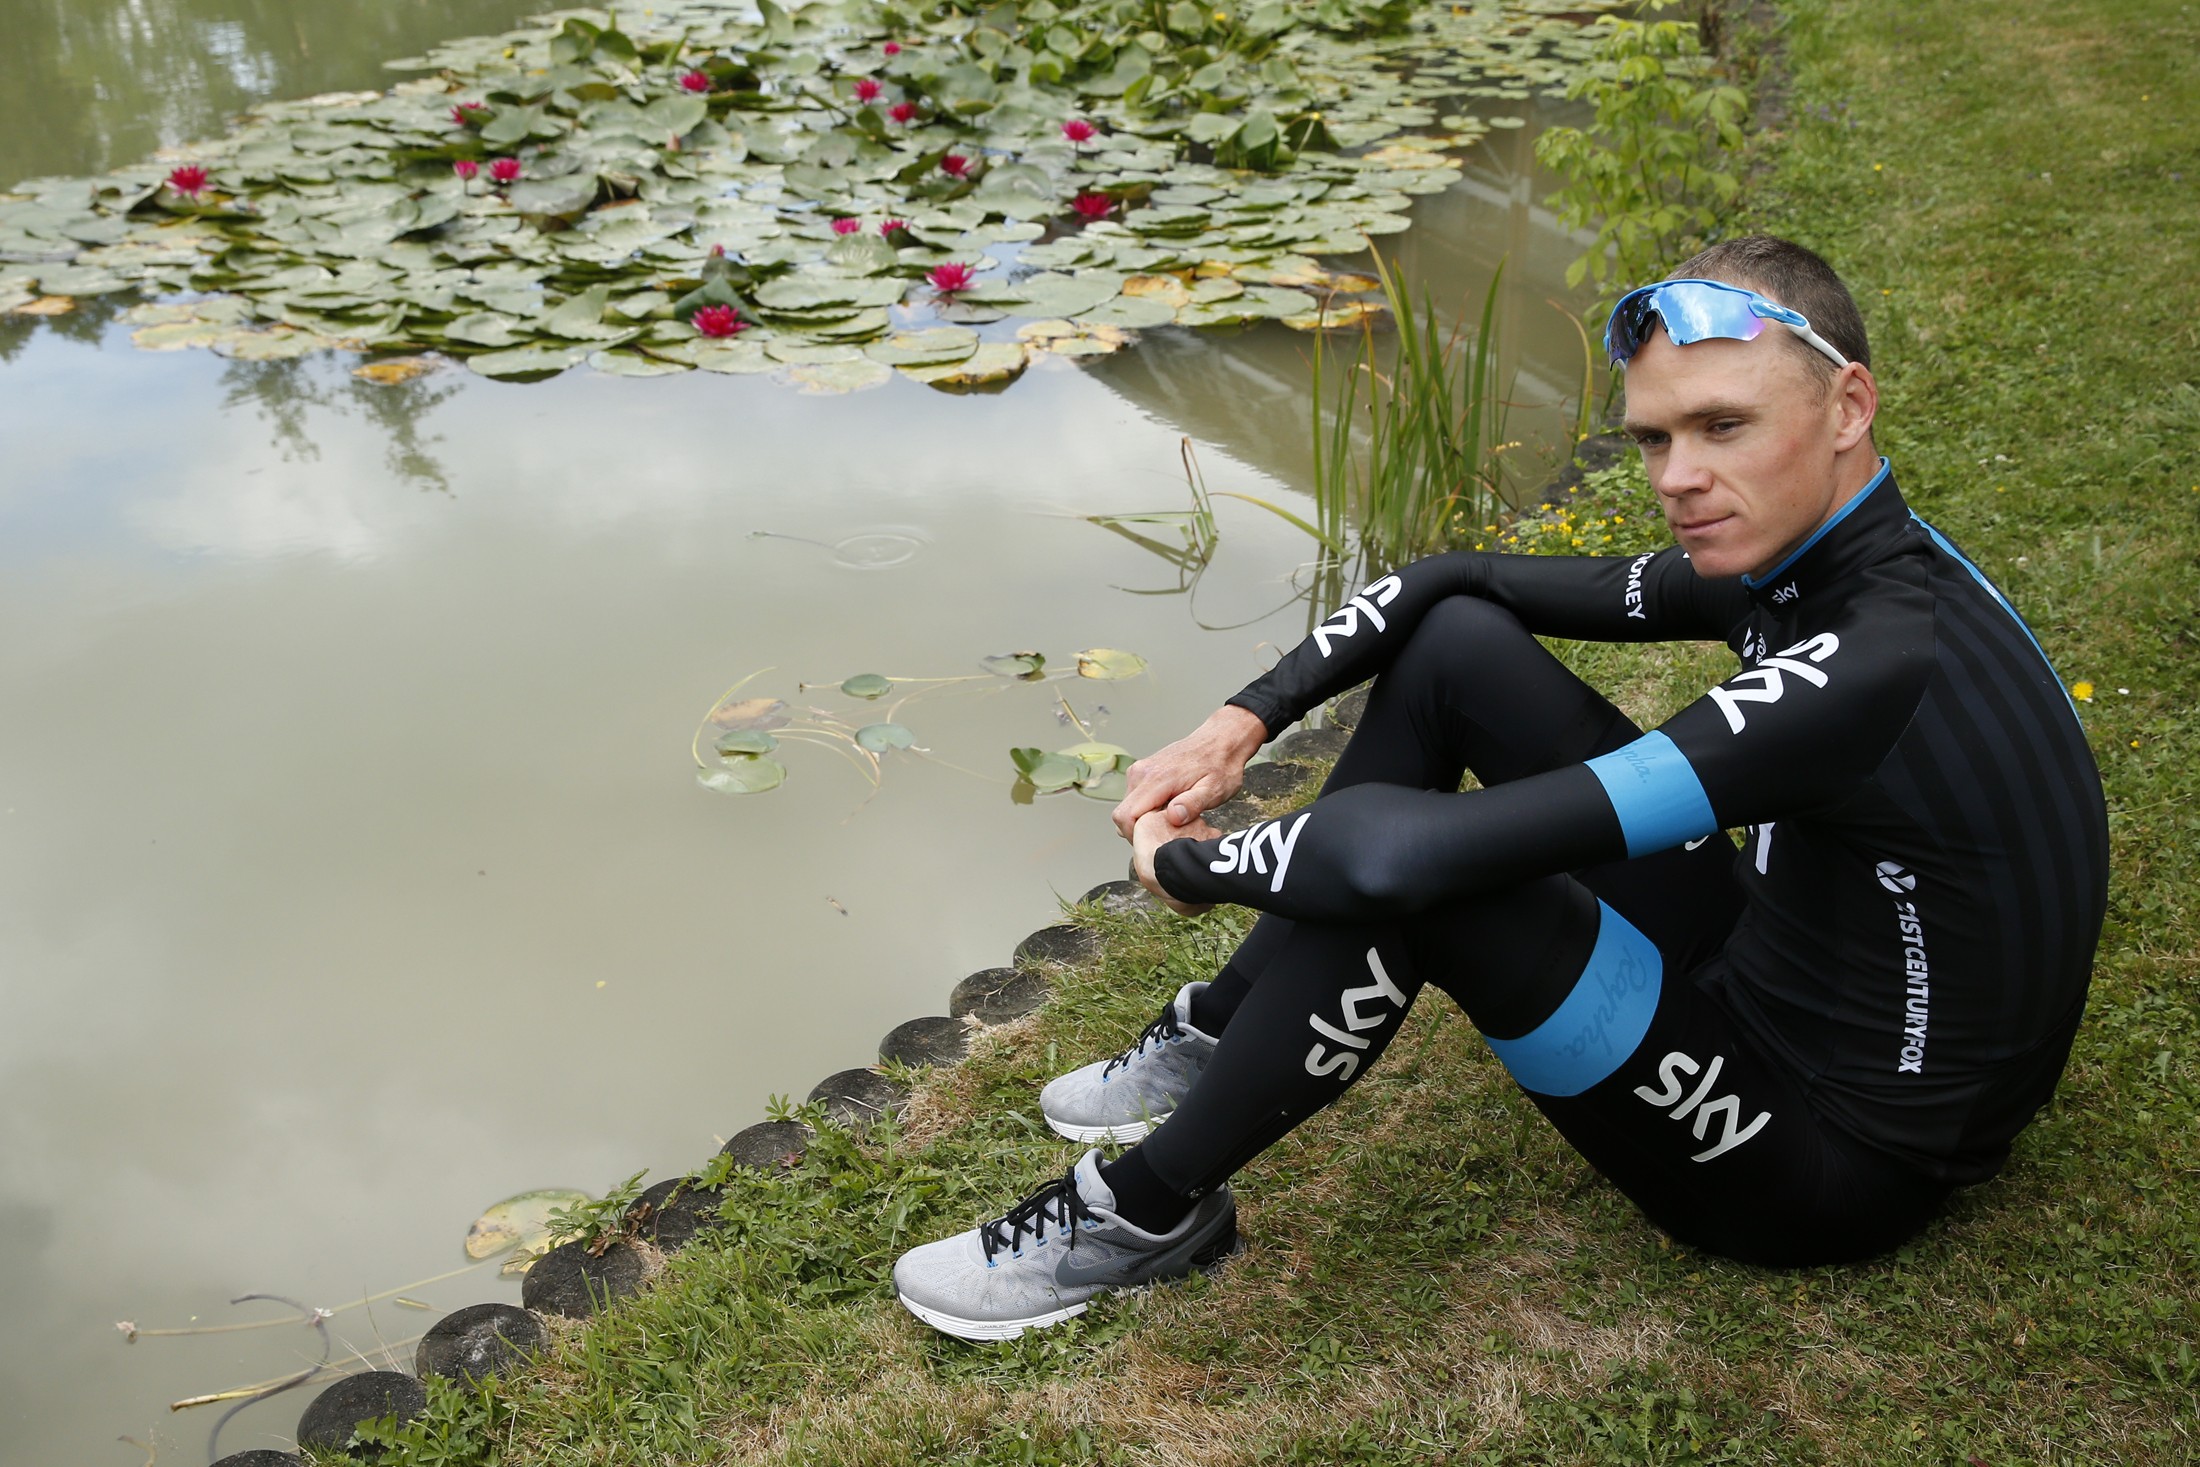 Chris Froome is relaxed on the Tour de France rest day as he looks ahead to the more challenging part of the classic cycling race. Photo: Reuters